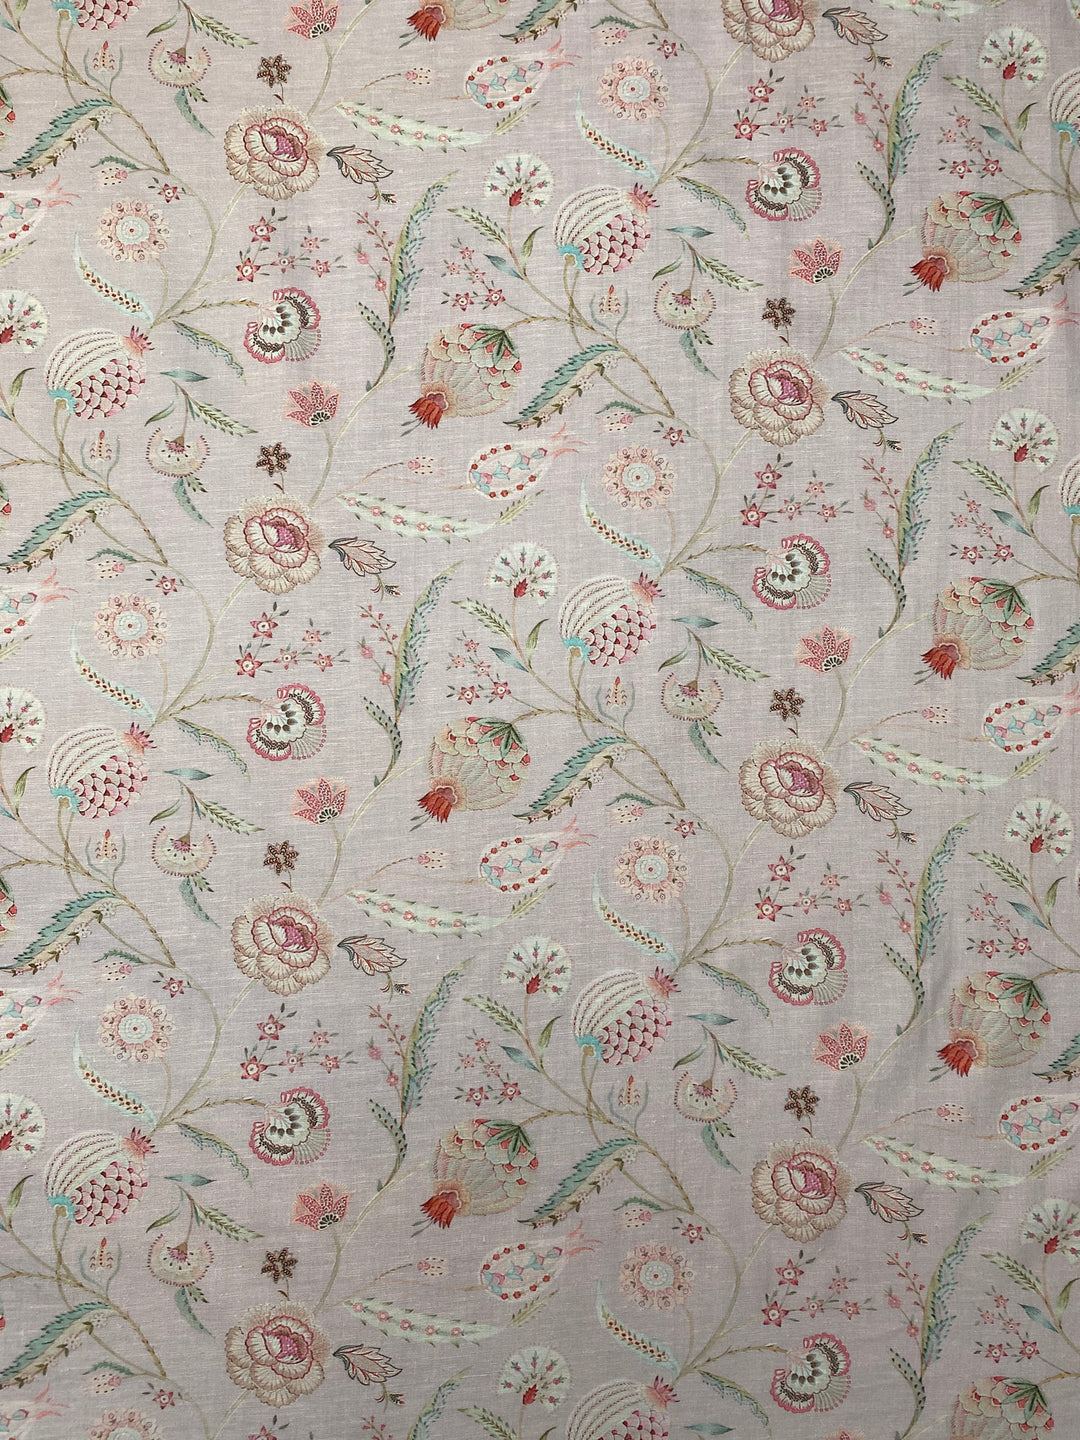 Printed Floral Muslin Linen Cotton Fabric